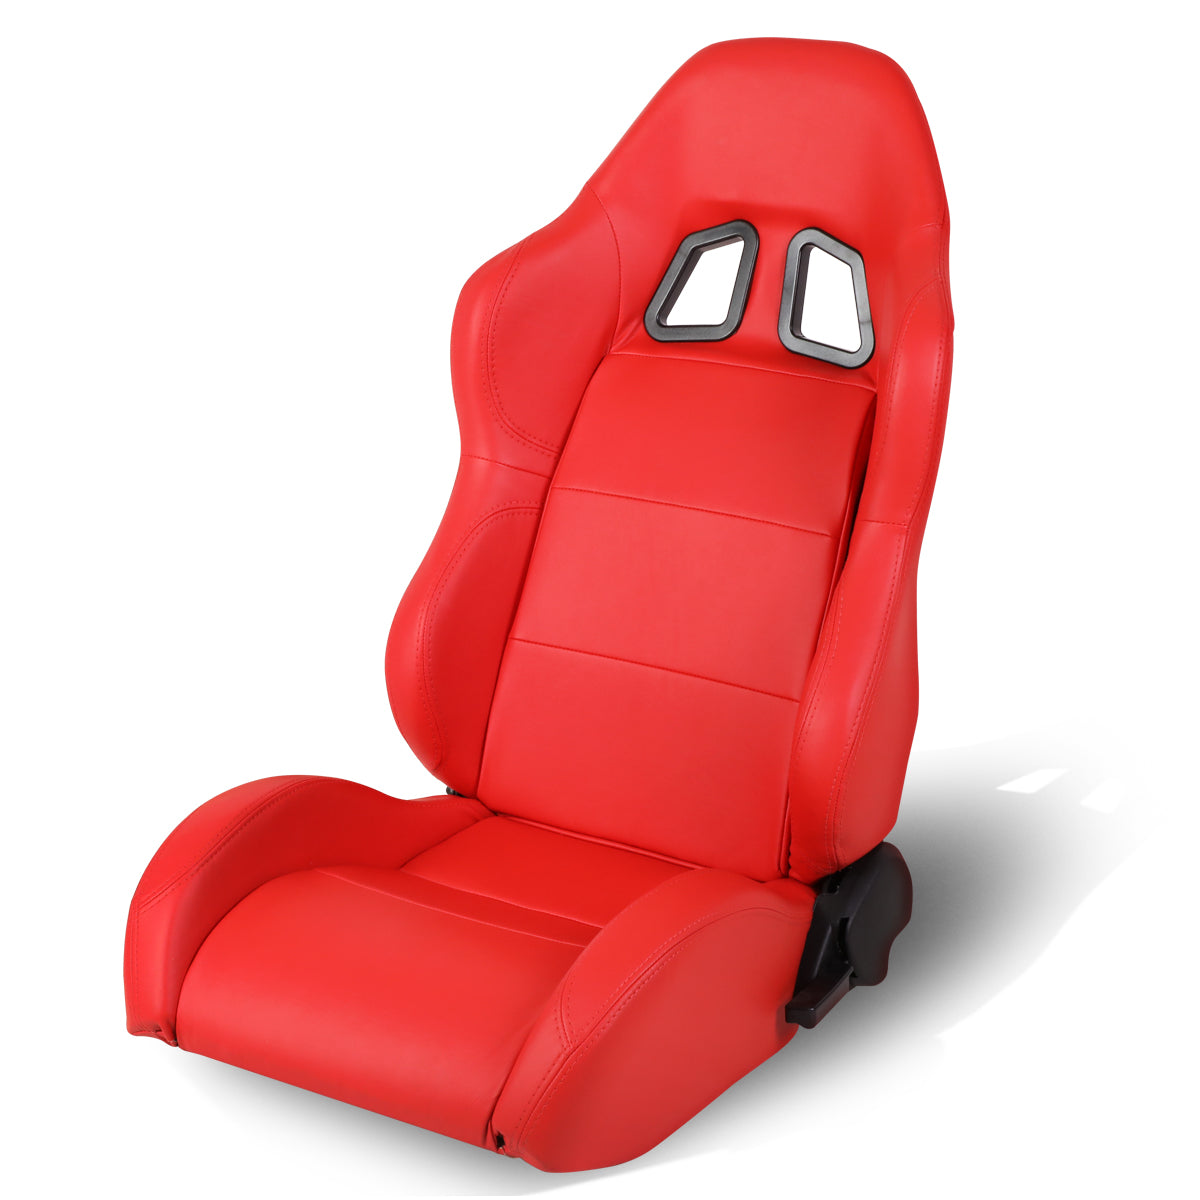 Left / Driver Side Reclinable PVC Leather Racing Seat - Red